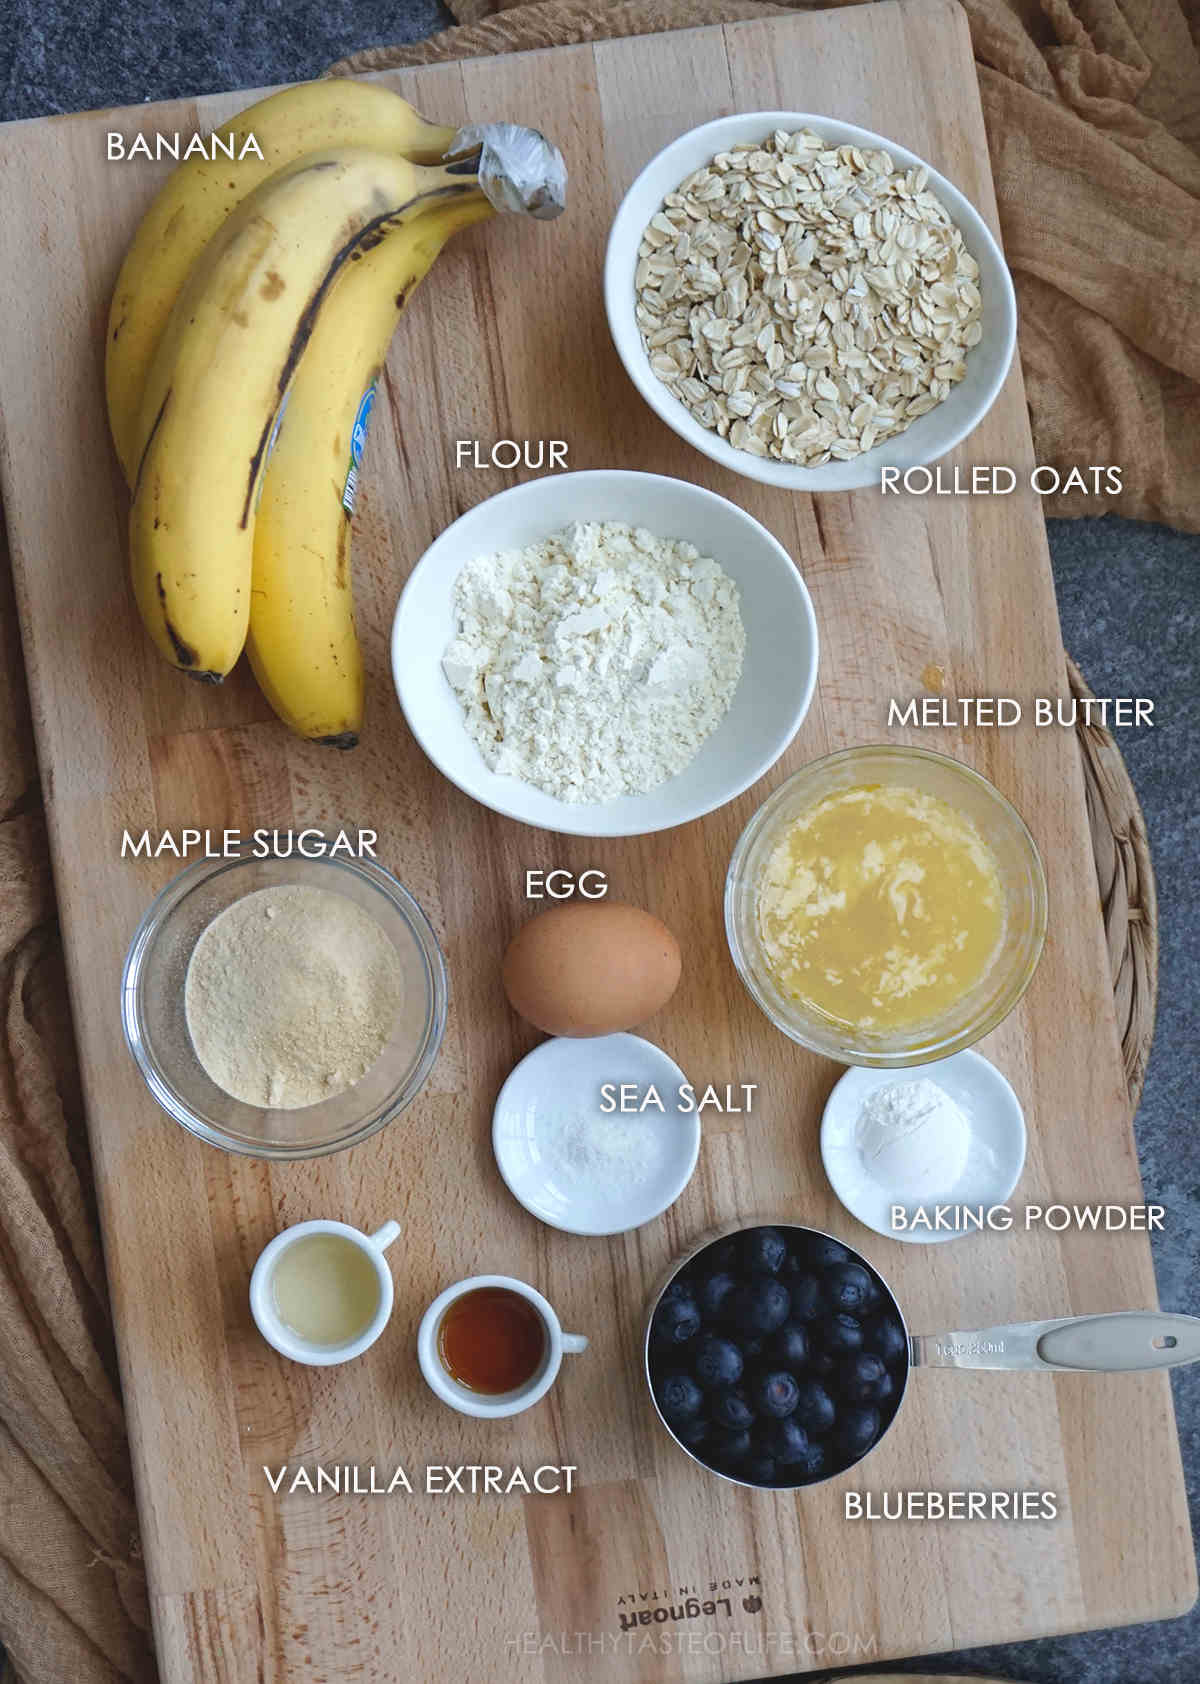 Ingredients for making oatmeal banana blueberry muffins displayed on a board.